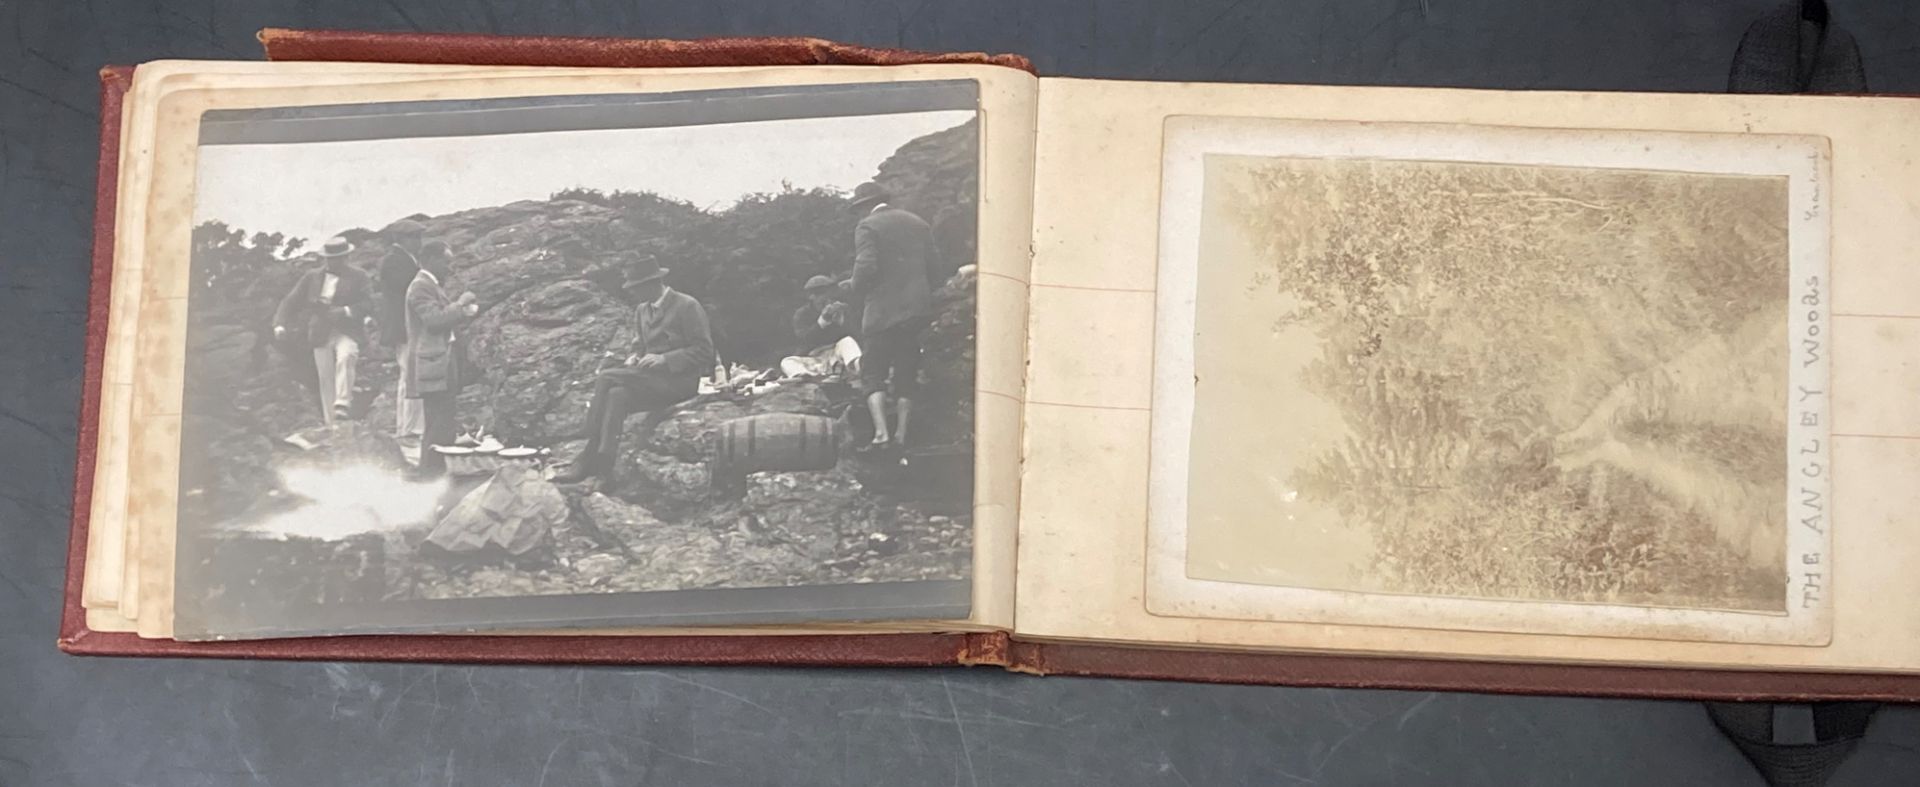 Photograph album relating to Captain Henry Maclean Fothergill who served in the Boxer Rebellion - Image 3 of 10